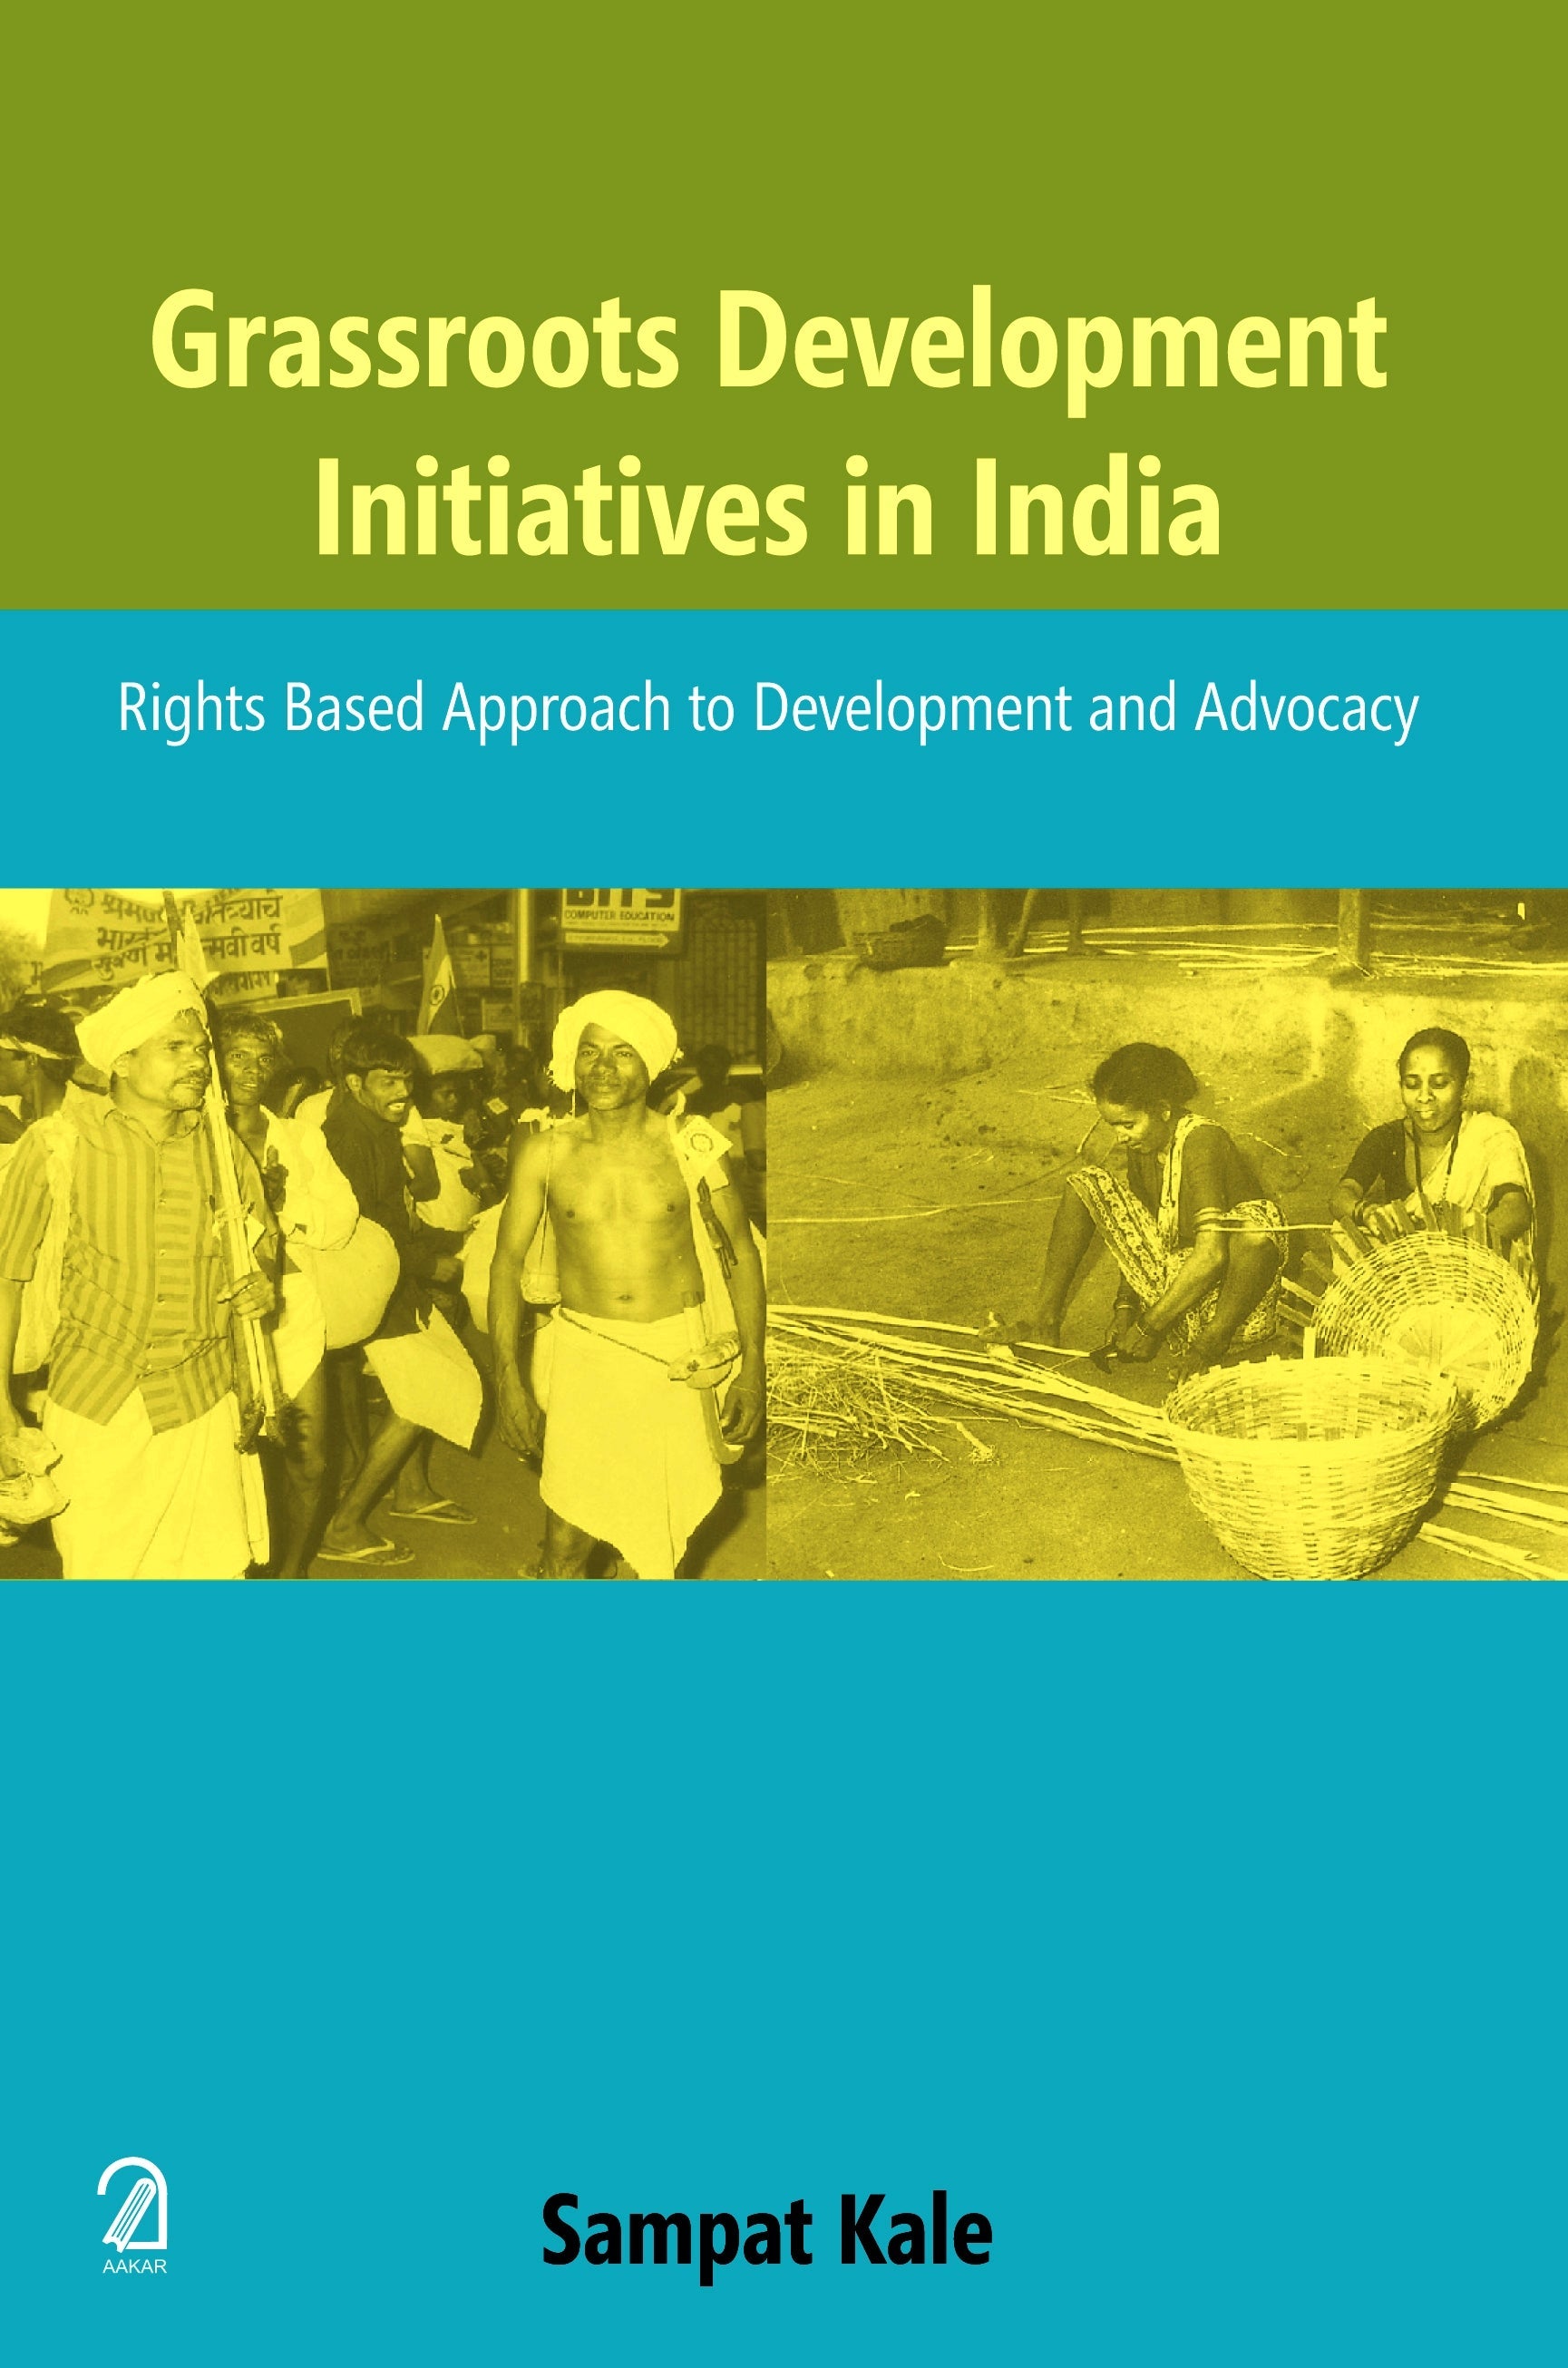 Grassroots Development Initiatives in India: Rights Based Approach to Development and Advocacy